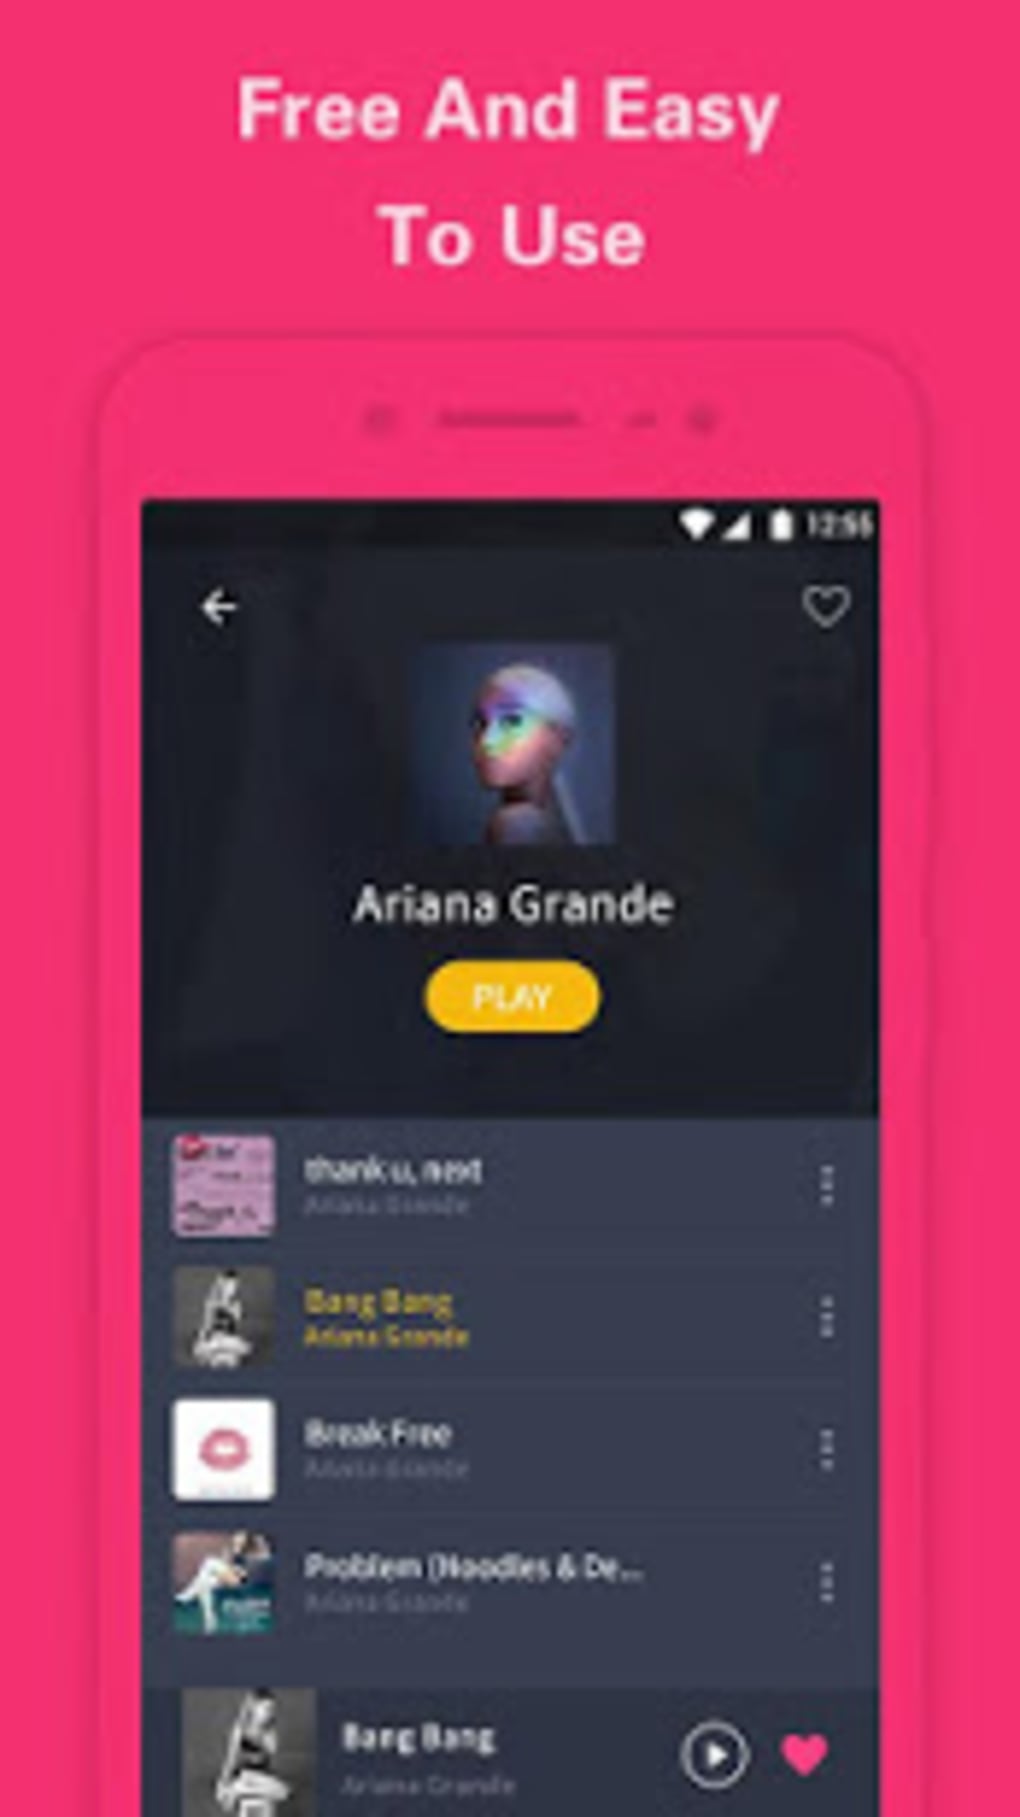 Free Music Download Mp3 Song Downloader Apk For Android Download - download mp3 thank you next song id on roblox 2018 free